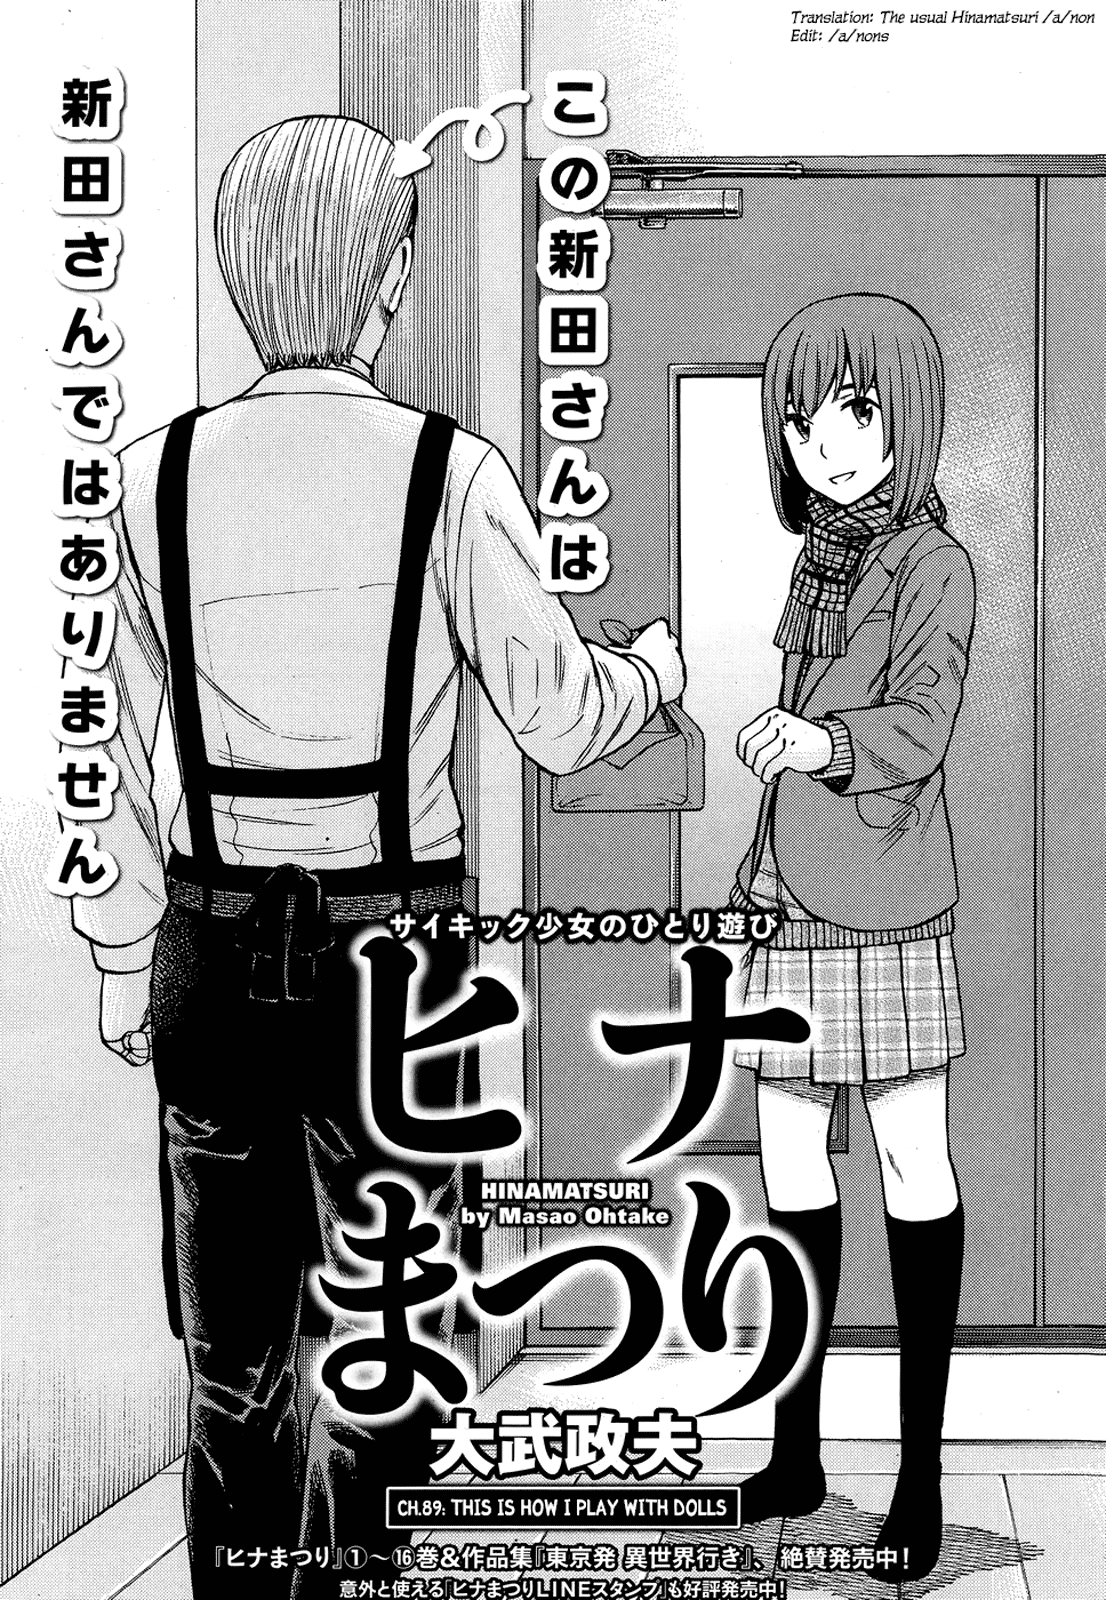 Hinamatsuri Vol.17-Chapter.89-This-is-how-I-play-with-dolls Image